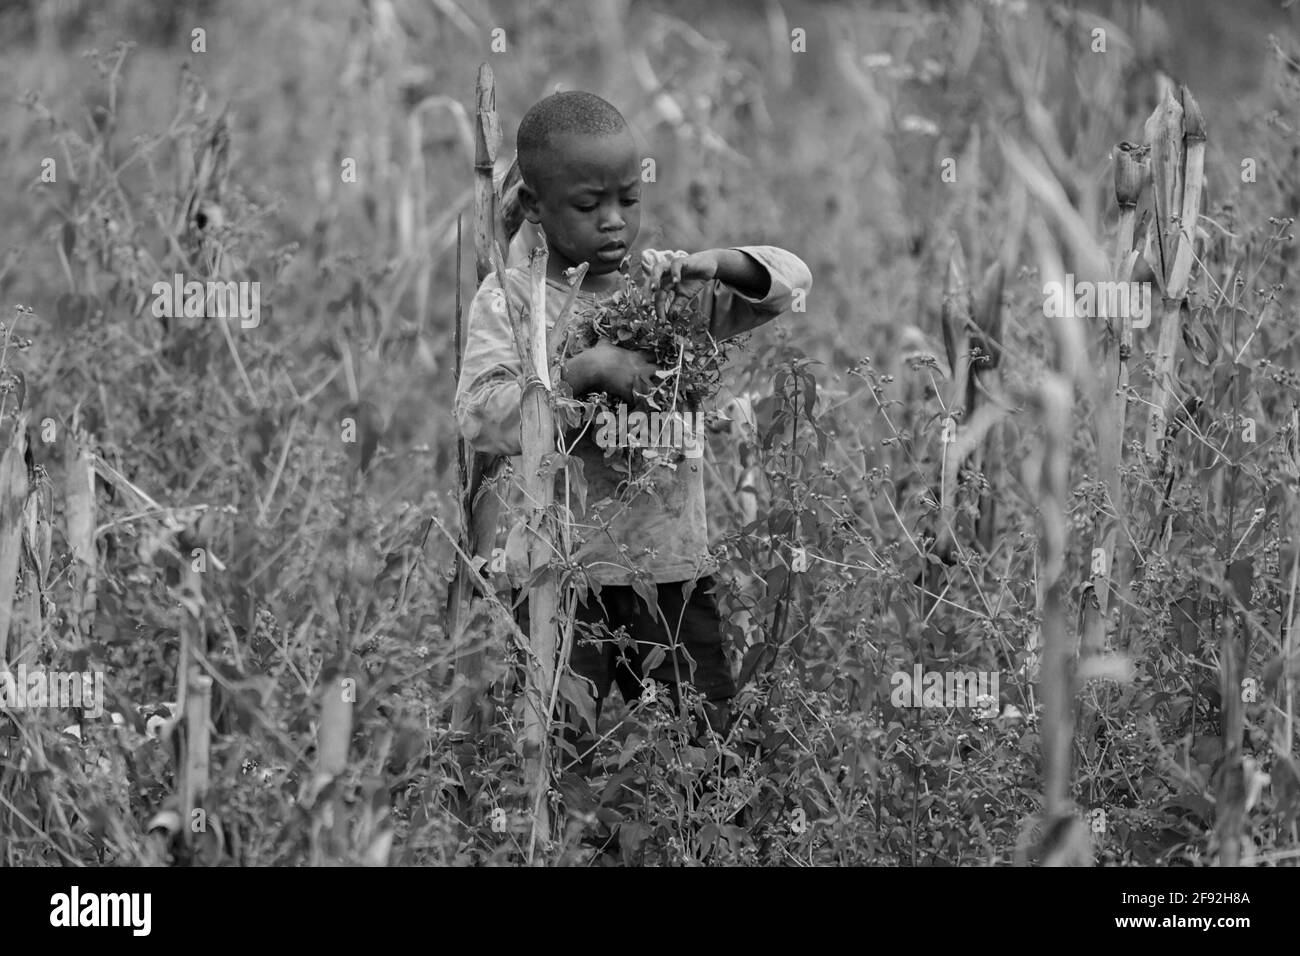 African young children Stock Photo